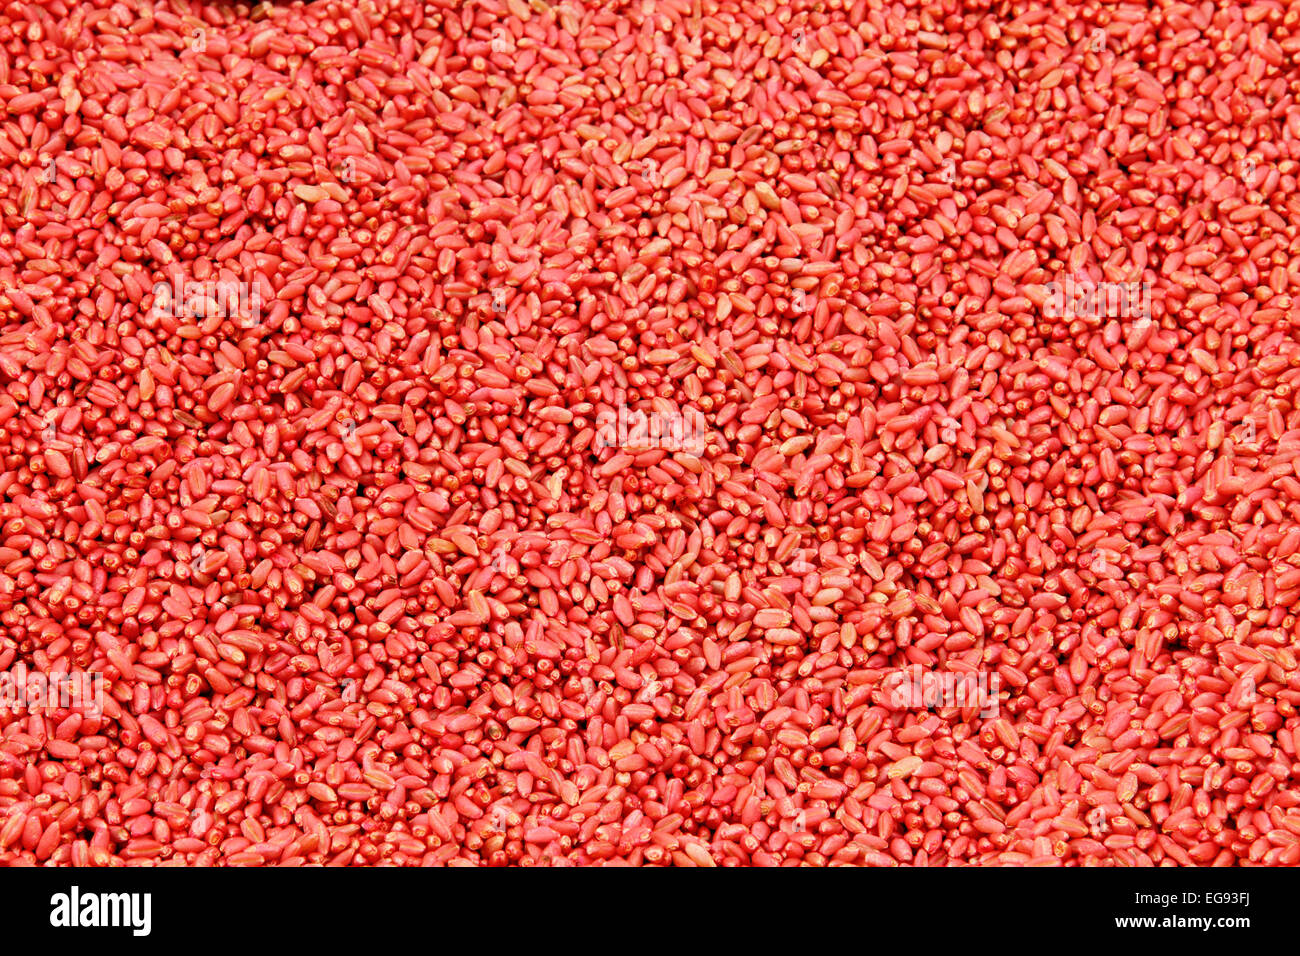 Wheat seed that has been treated for anti rot and disease resistance. Stock Photo